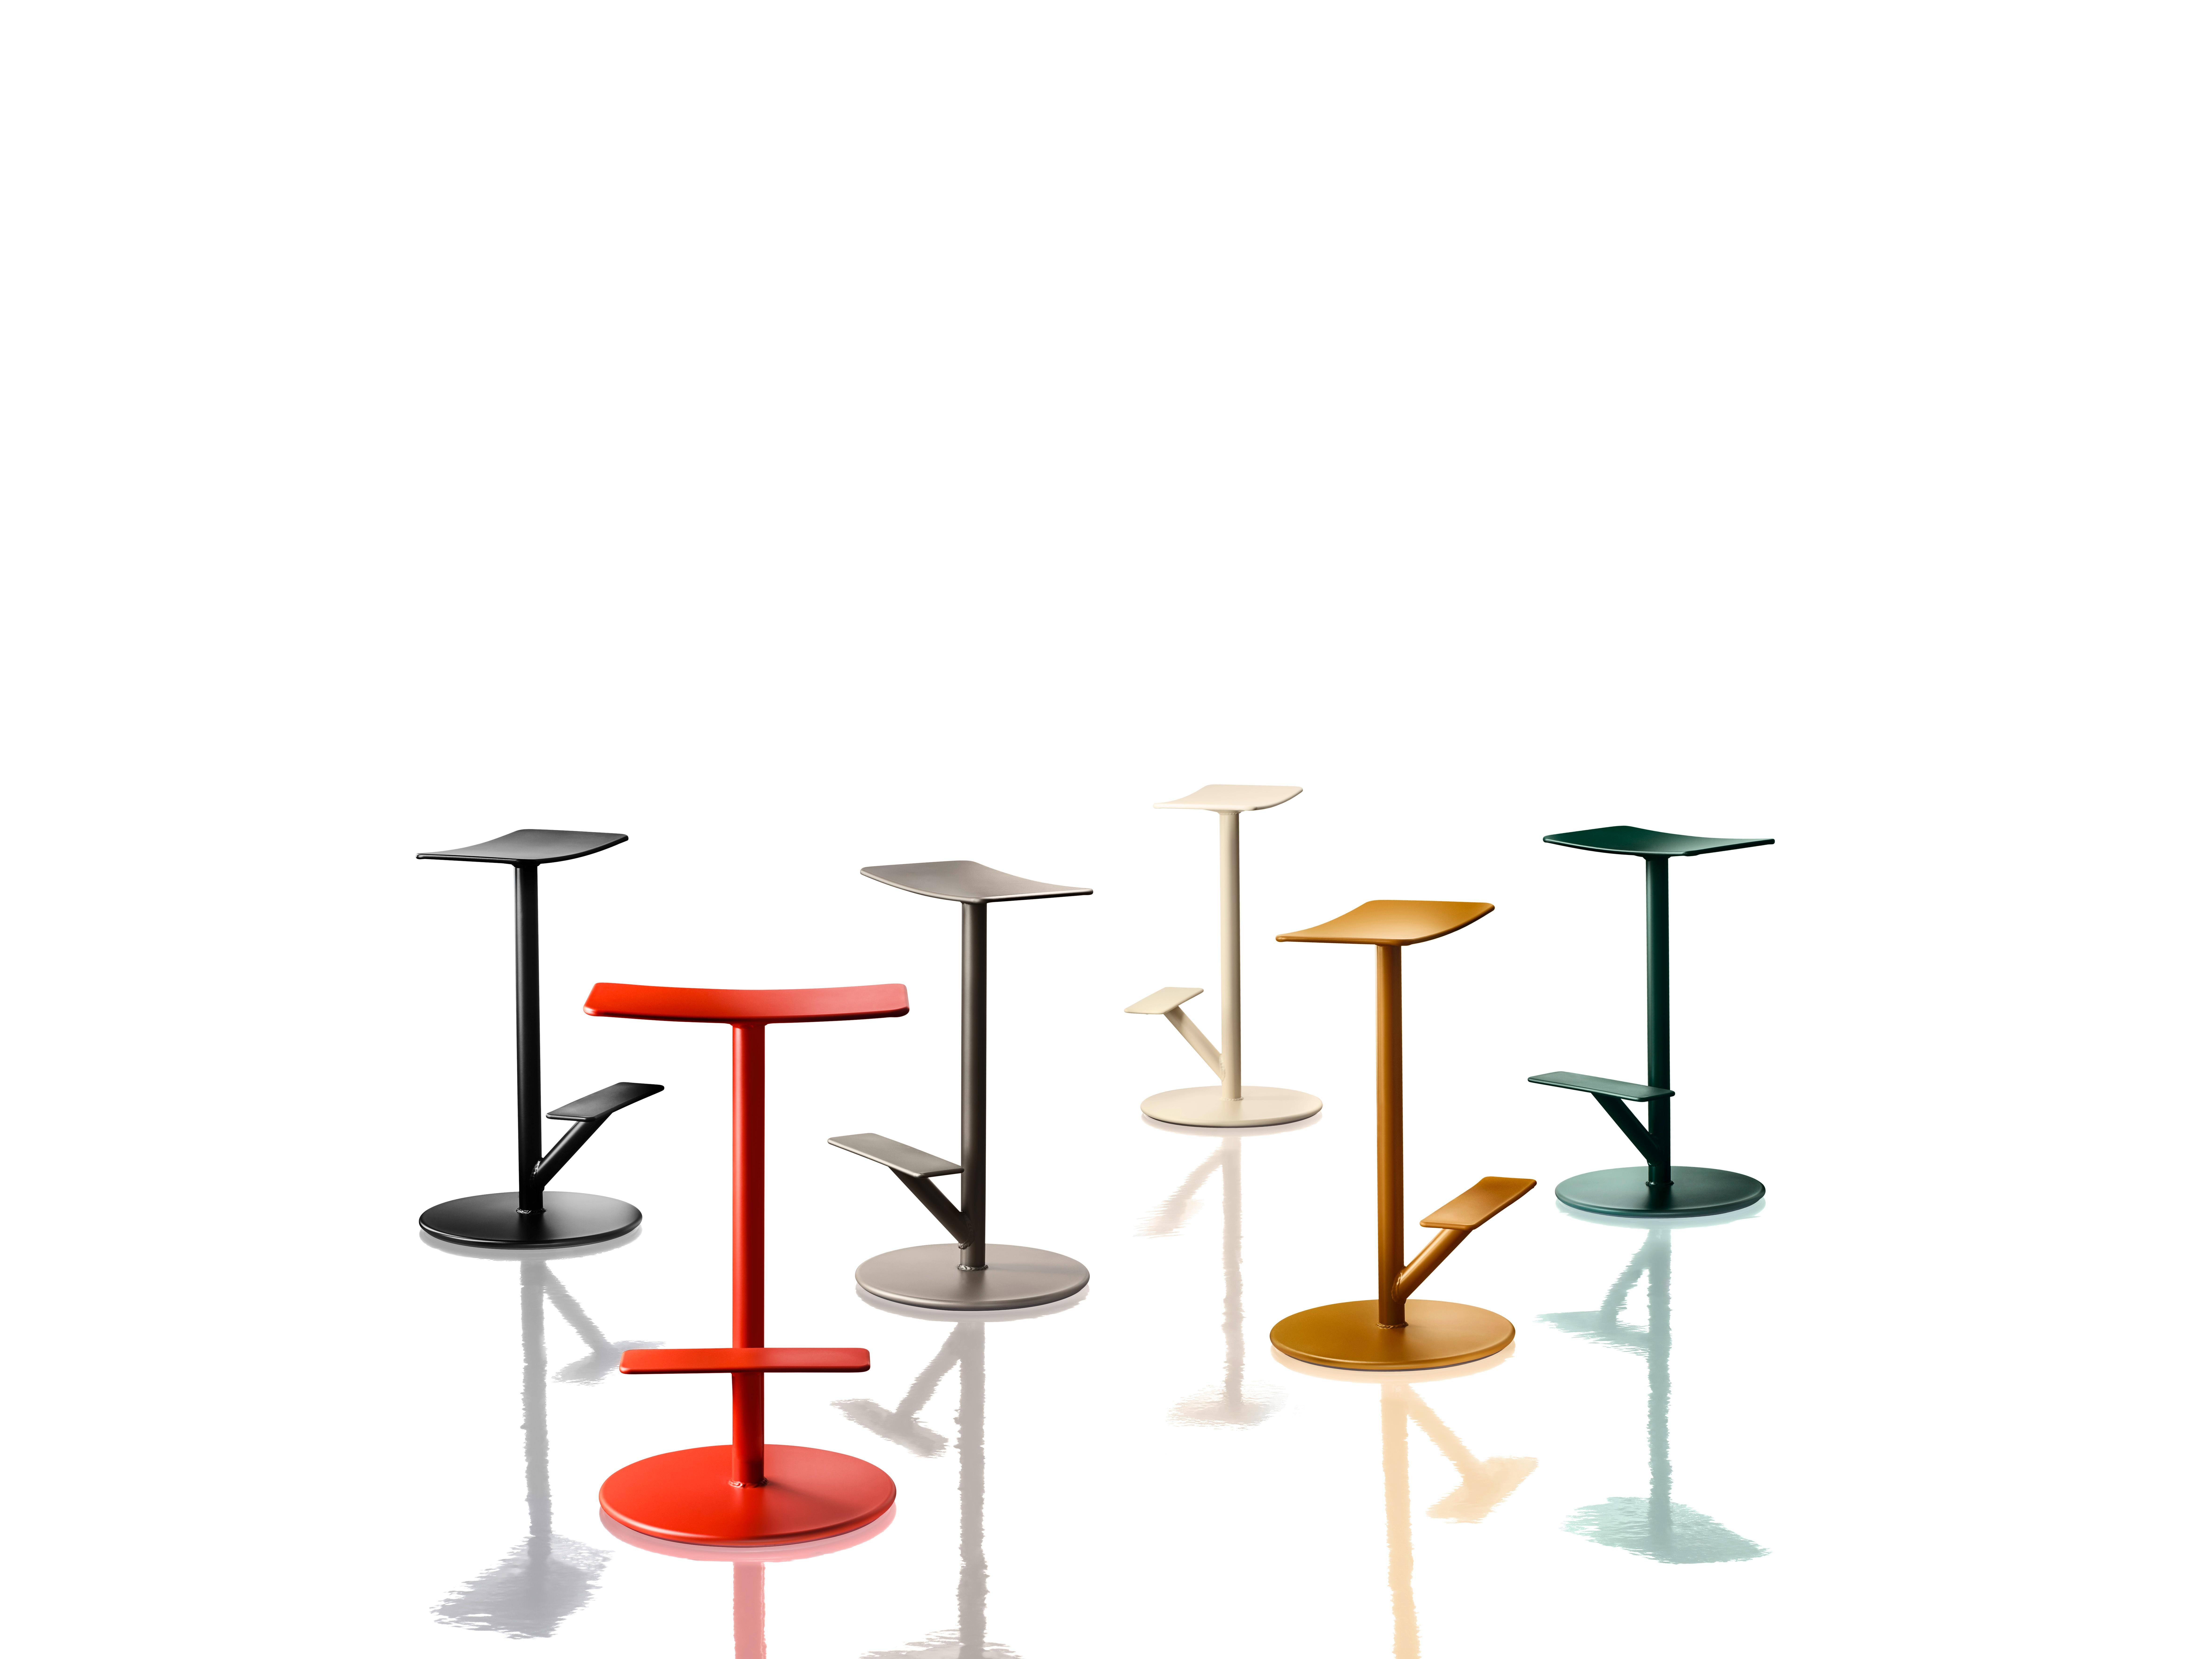 The project name of our ‘Sequoia’ bar stool was ‘Forest’, as the division of the stem into two tubes reminded us of a solid branch growing out of tree trunk.
Sequoia has a clear recognizable, unified graphical outline - it reminds us of a